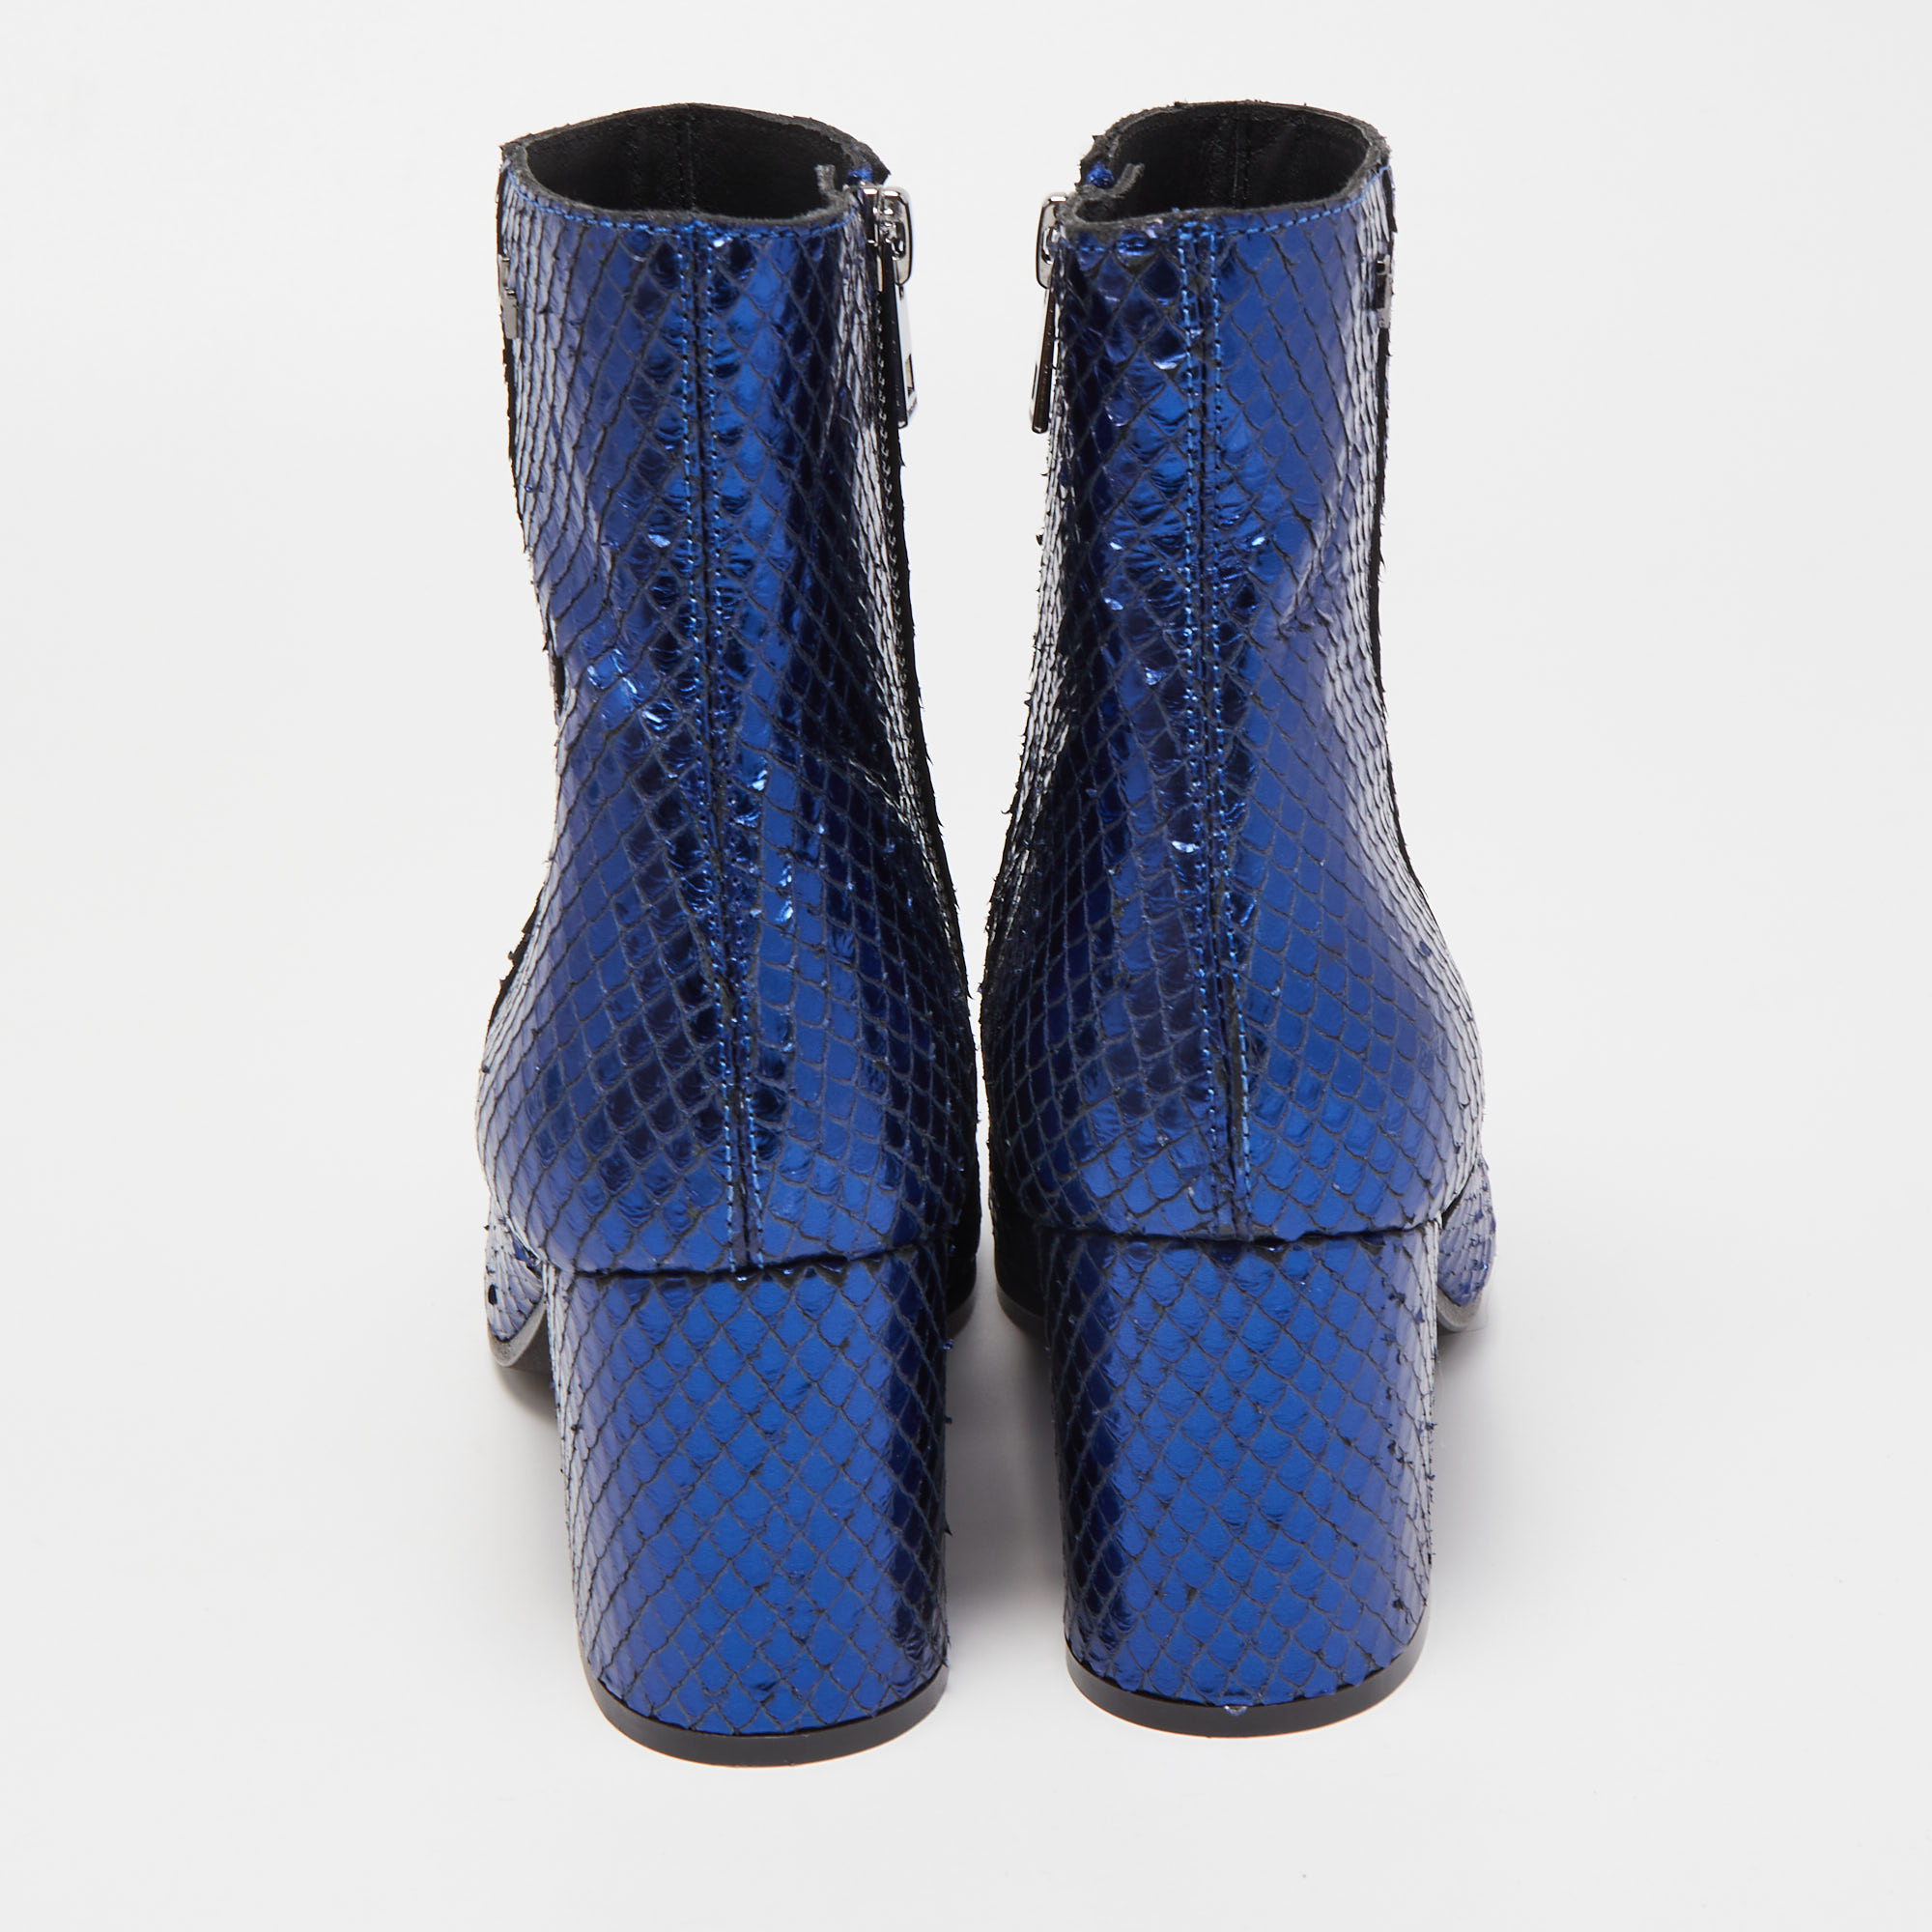 Zadiq & Voltaire Blue Python Embossed Leather Block Heel Ankle Booties Size 37